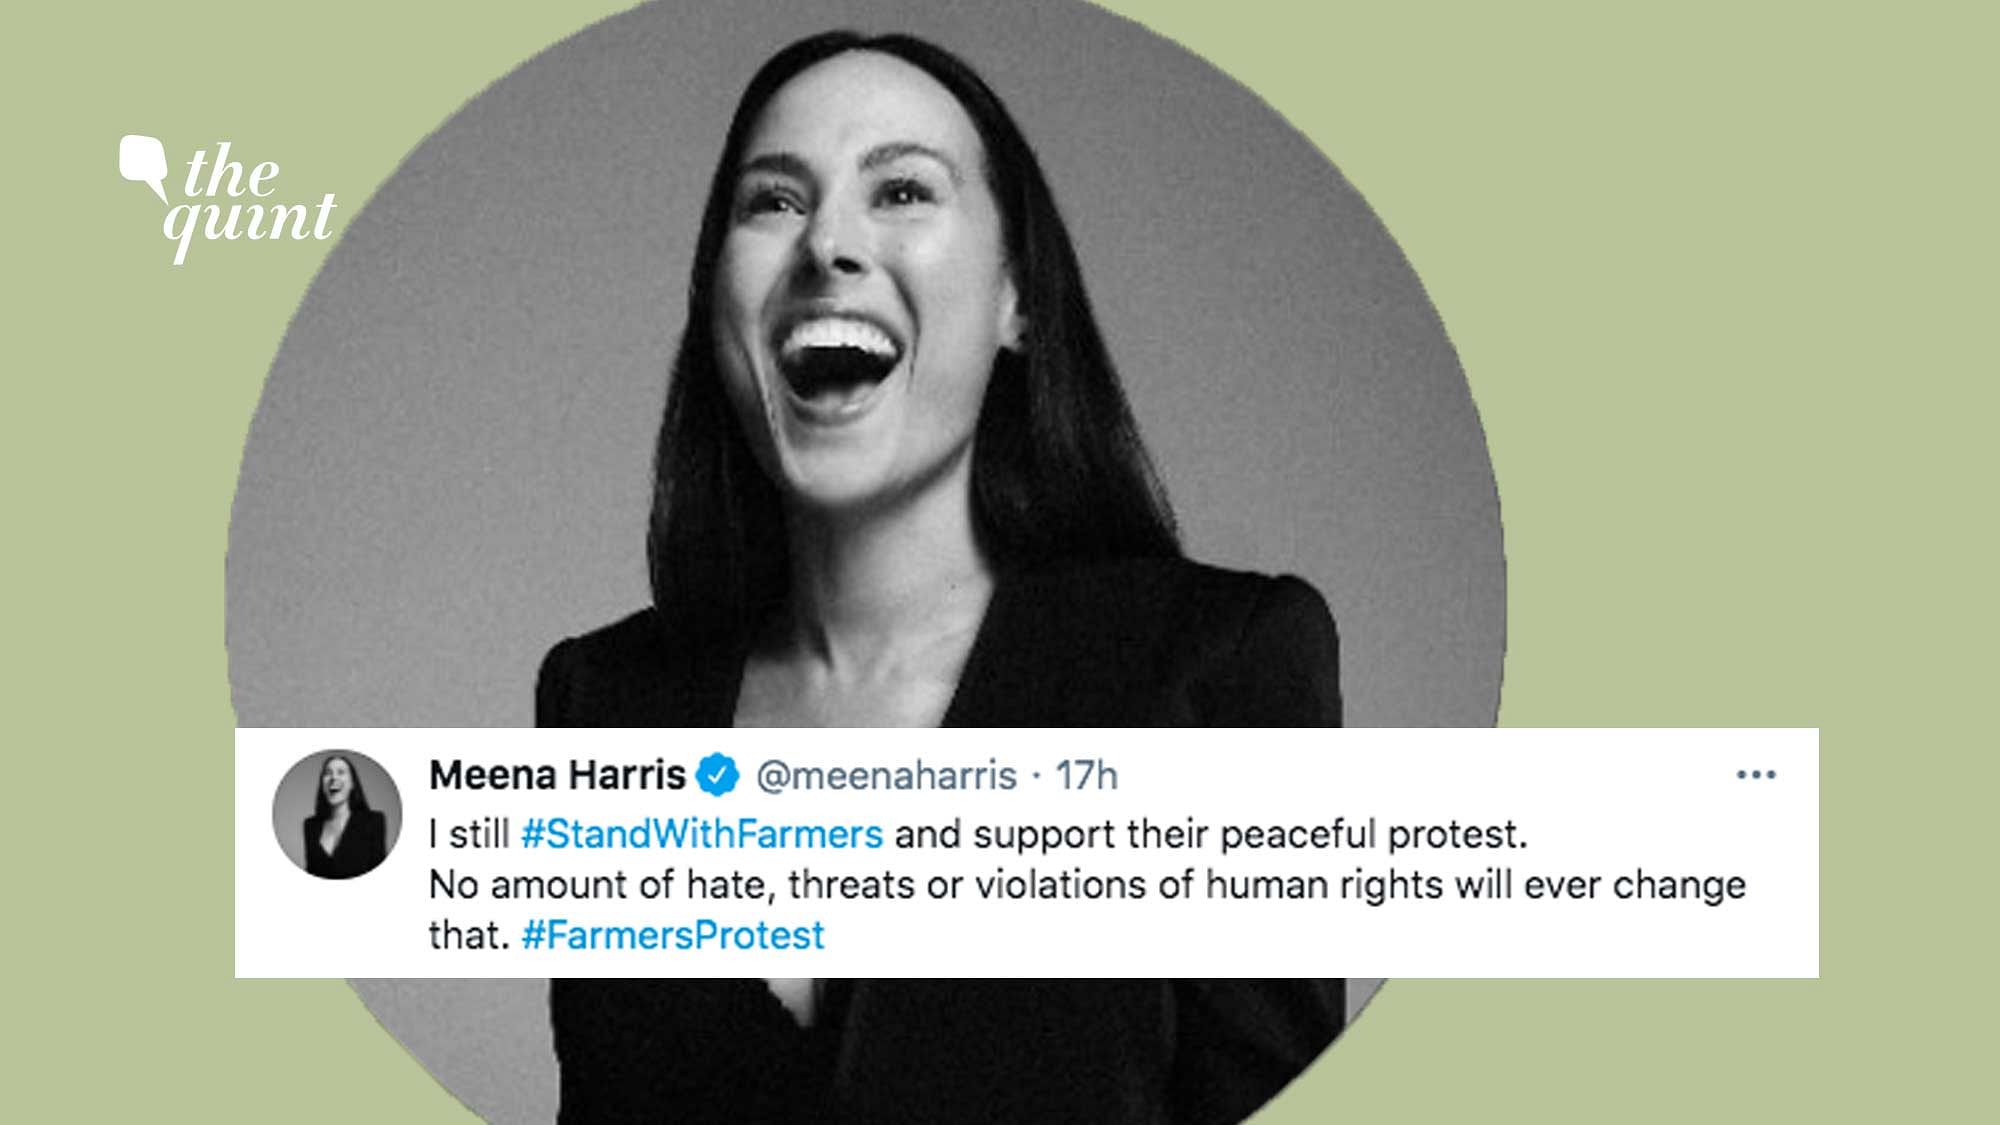 On 3 February, Meena Harris tweeted in solidarity with the ongoing farmers’ protest.